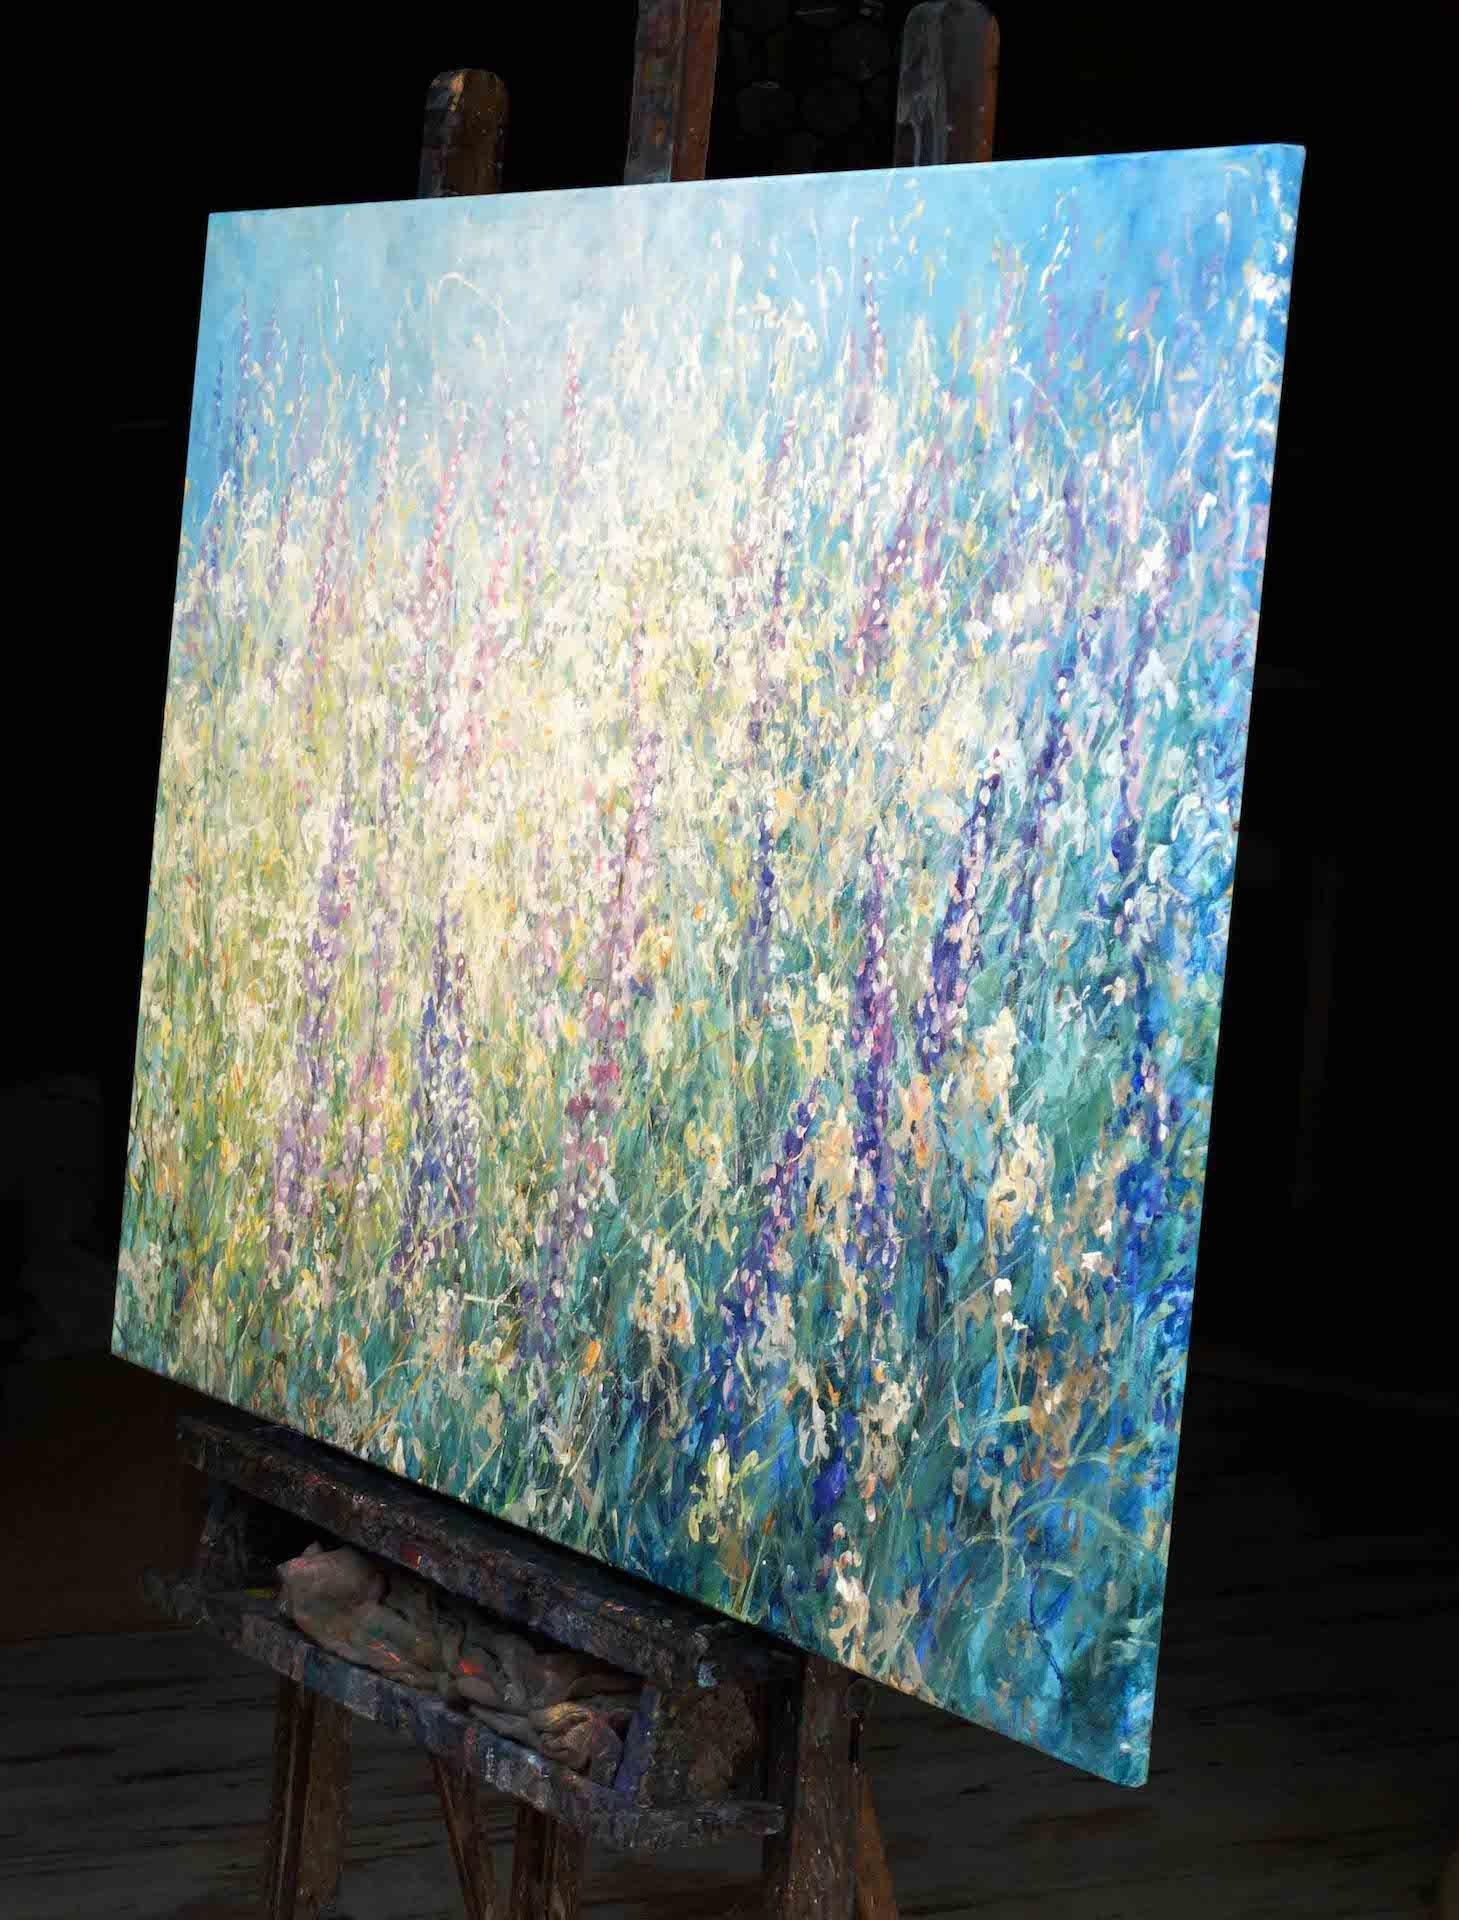 Mariusz Kaldowski
Lupin
Original Floral Painting
Acrylic Paint on Canvas
Sold Unframed
Framed Size: H 70cm x W 100cm
Please note that in situ images are purely an indication of how a piece may look.

Lupin is an impressionistic depiction of a field